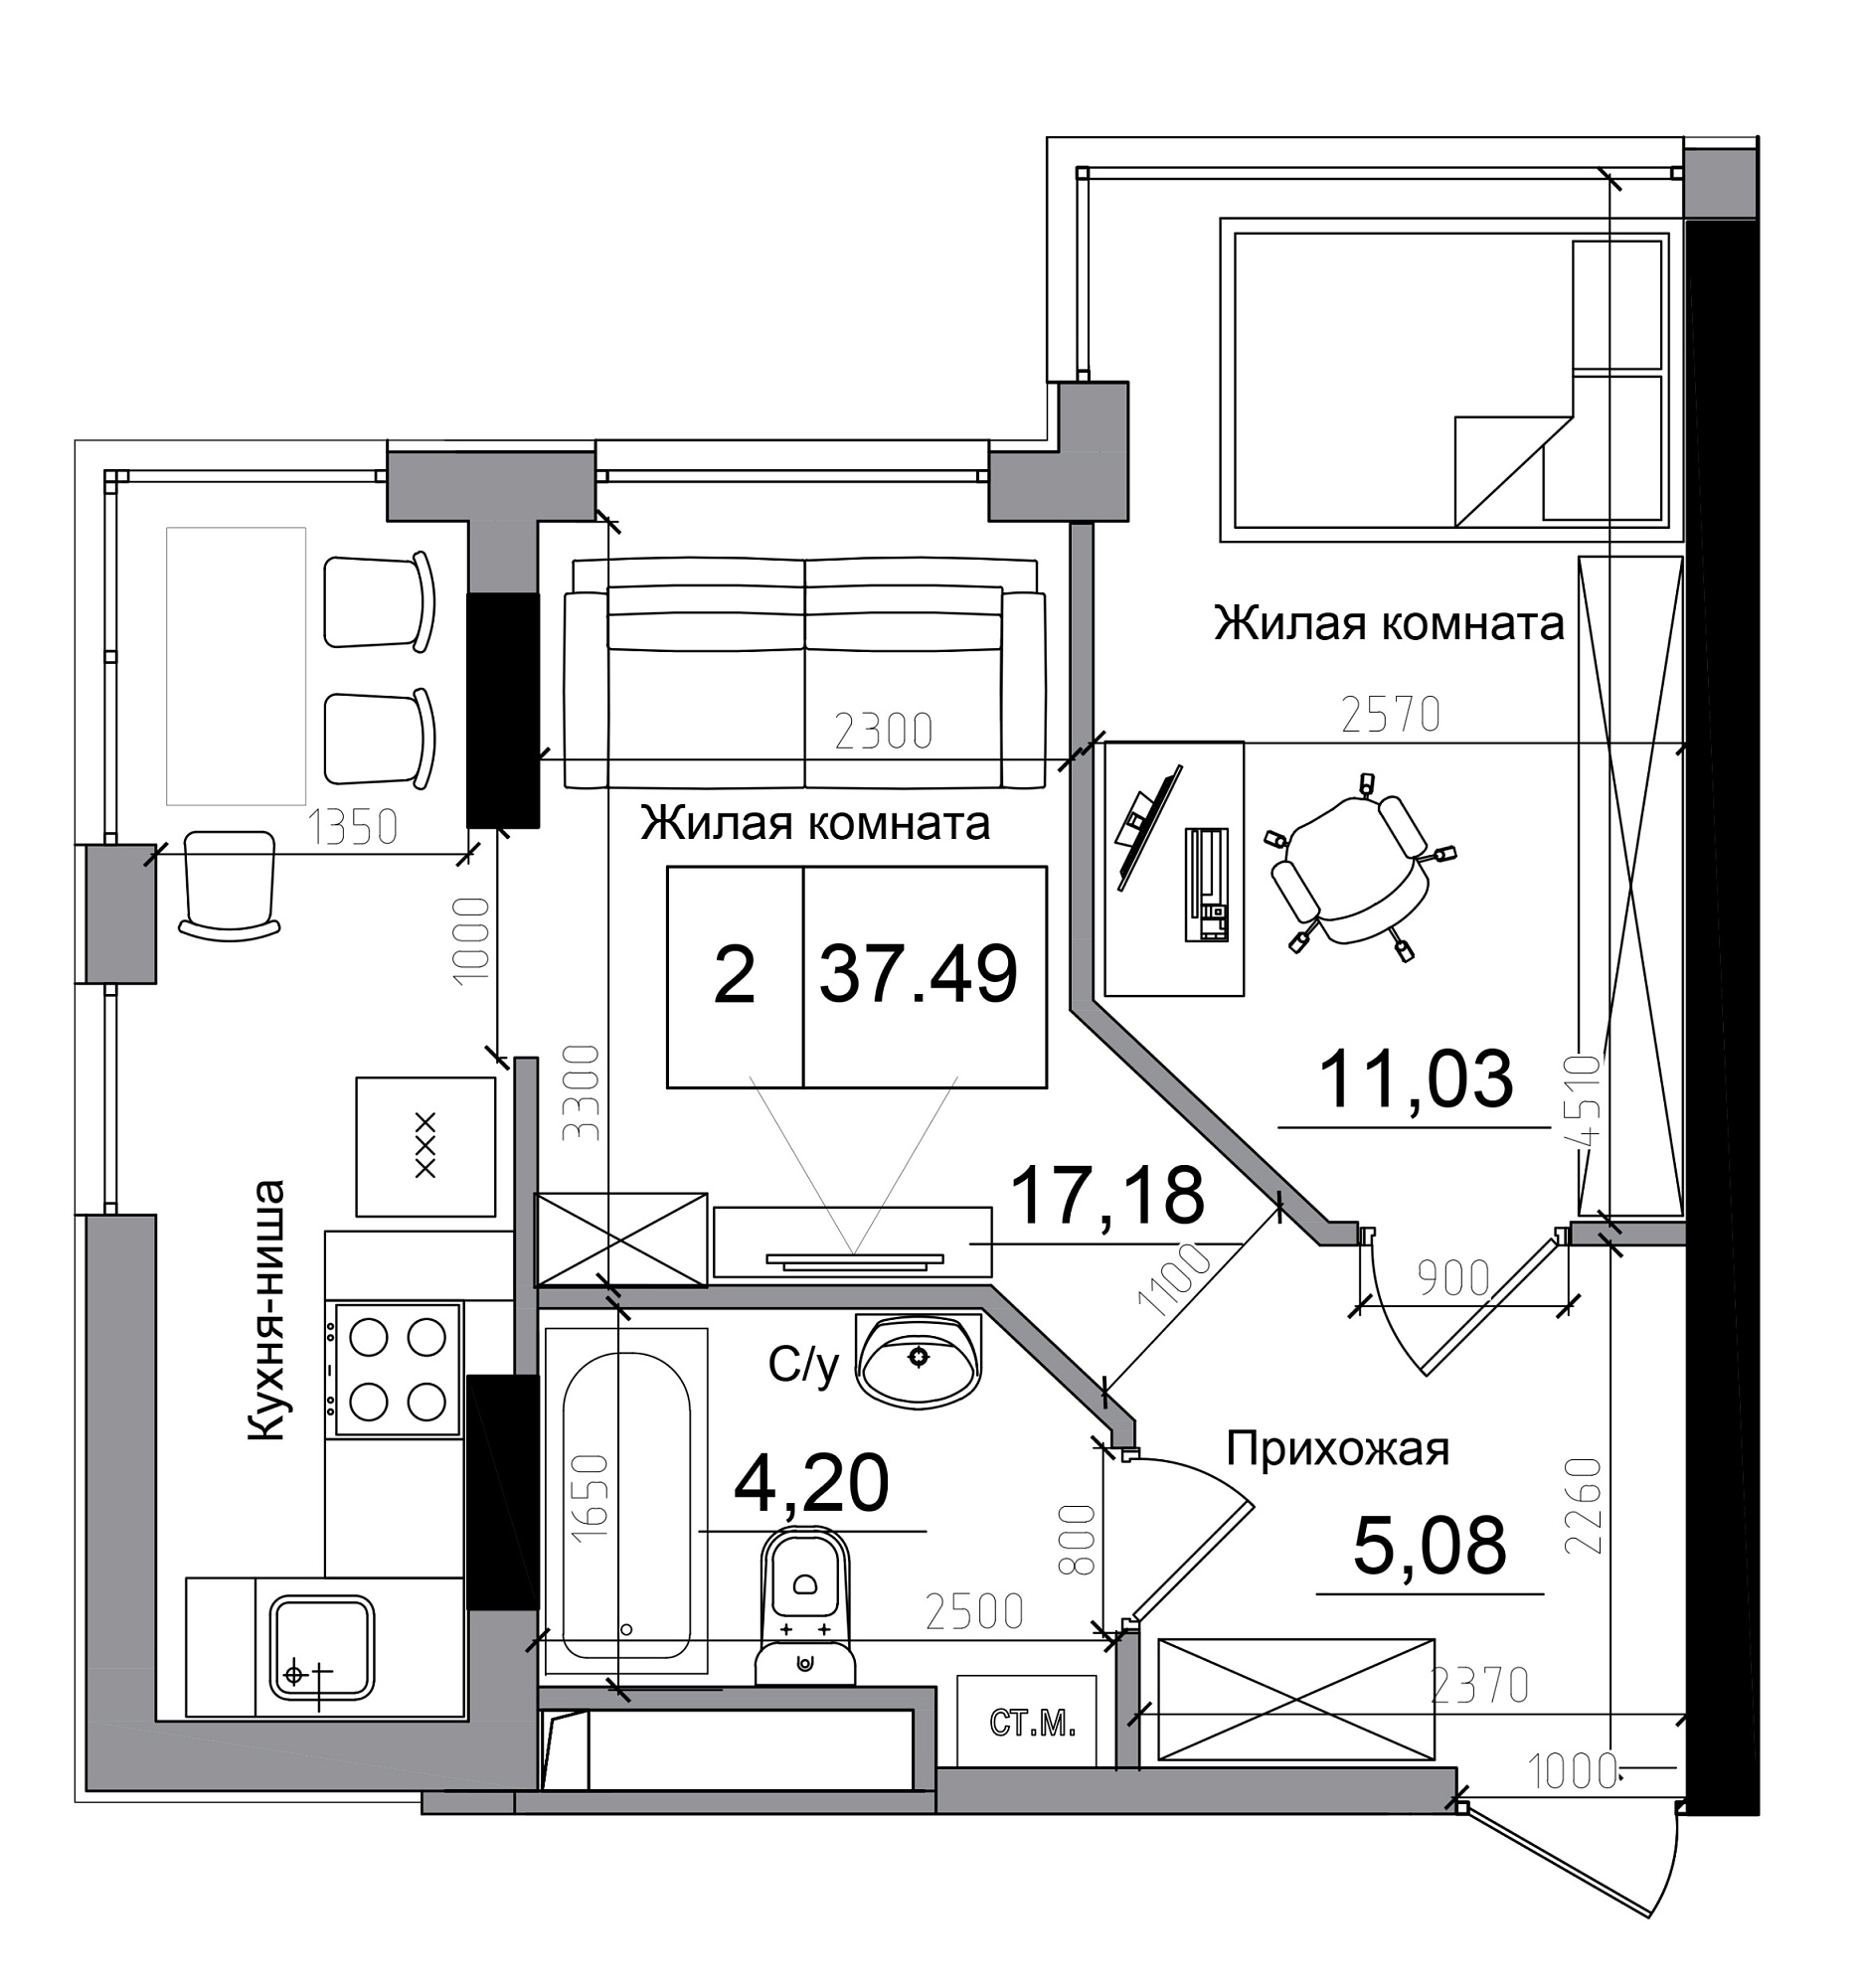 Planning 1-rm flats area 37.49m2, AB-11-11/00005.